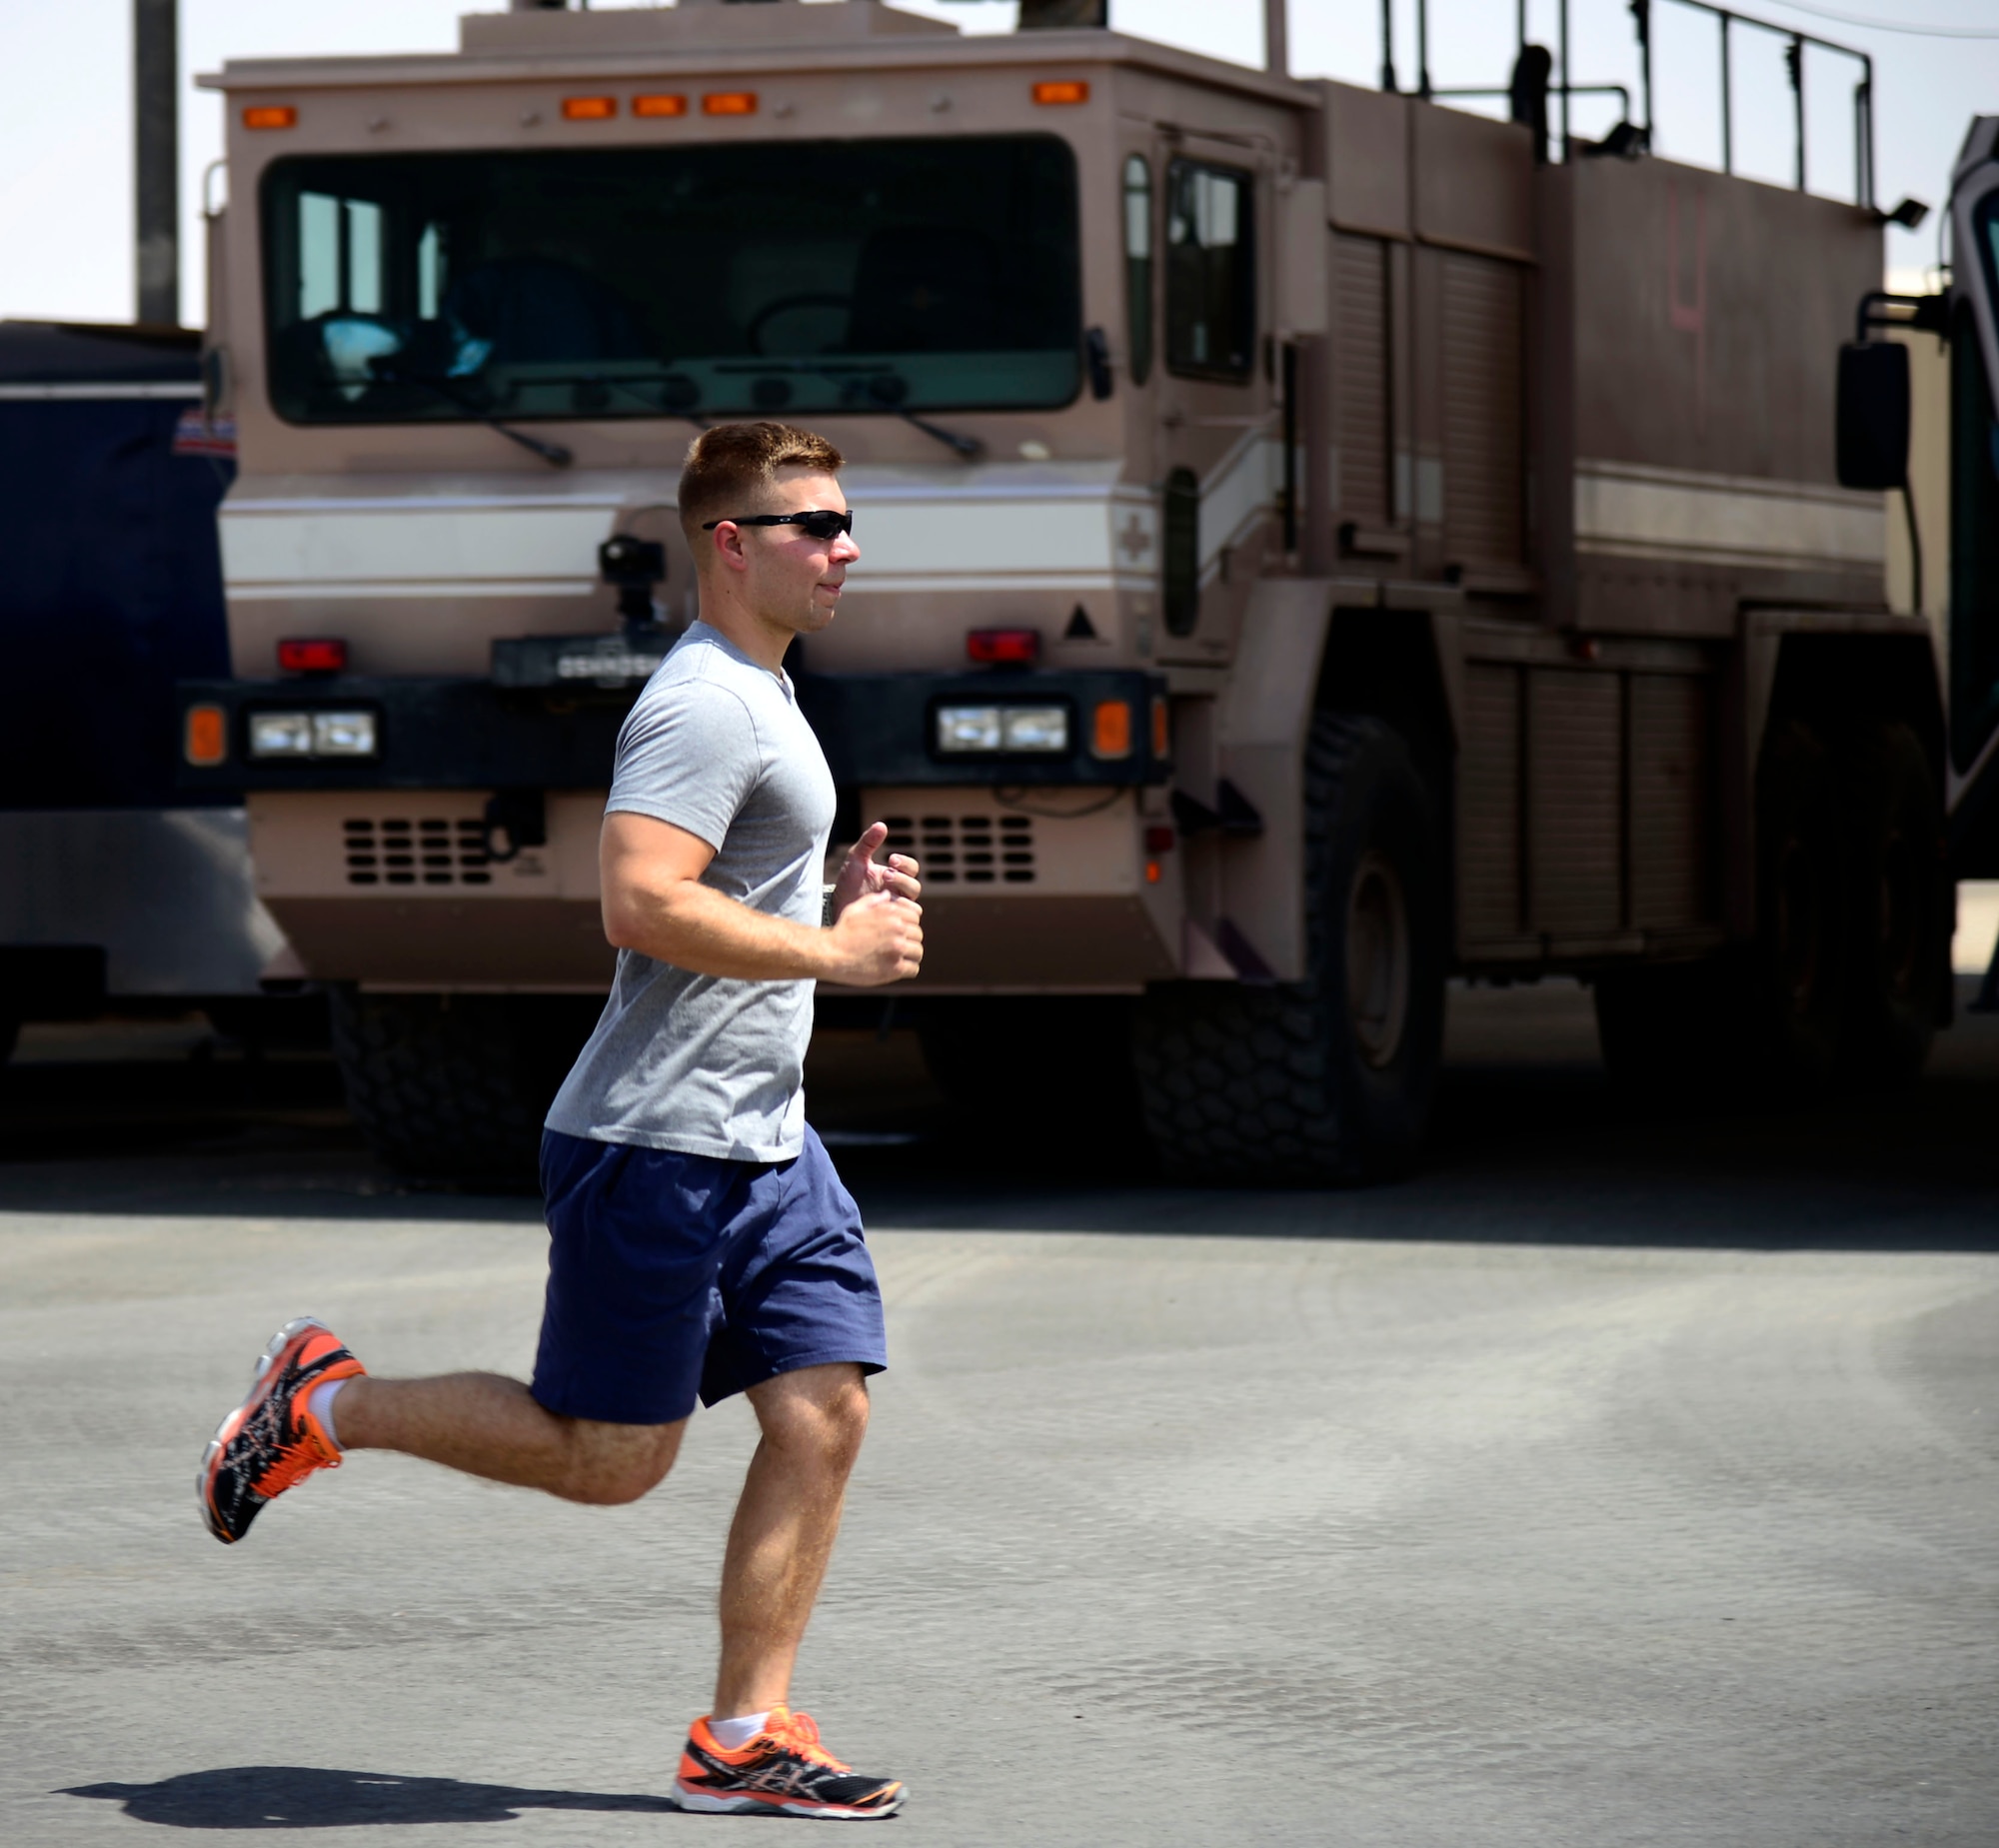 U.S. Air Force Senior Airman Zach White, 332nd Expeditionary Civil Engineer Squadron fire truck engineer and driver operator, runs to raise awareness for the Special Olympics at an undisclosed location in Southwest Asia, Aug. 20, 2015. White faces challenges such as temperatures more than 120 degrees and a tasking deployment schedule, but makes every mile count. (U.S. Air Force photo by Senior Airman Racheal E. Watson/Released)